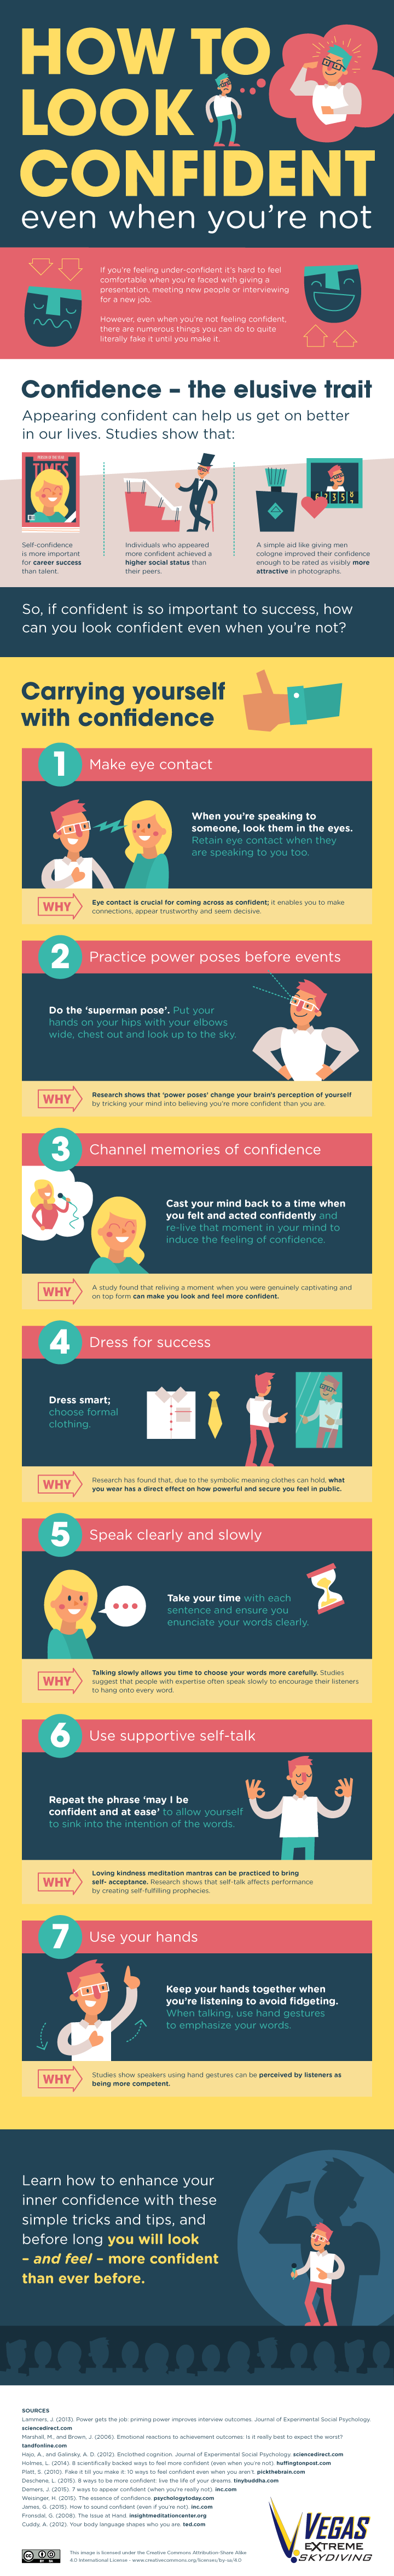 look-confident-infographic.png